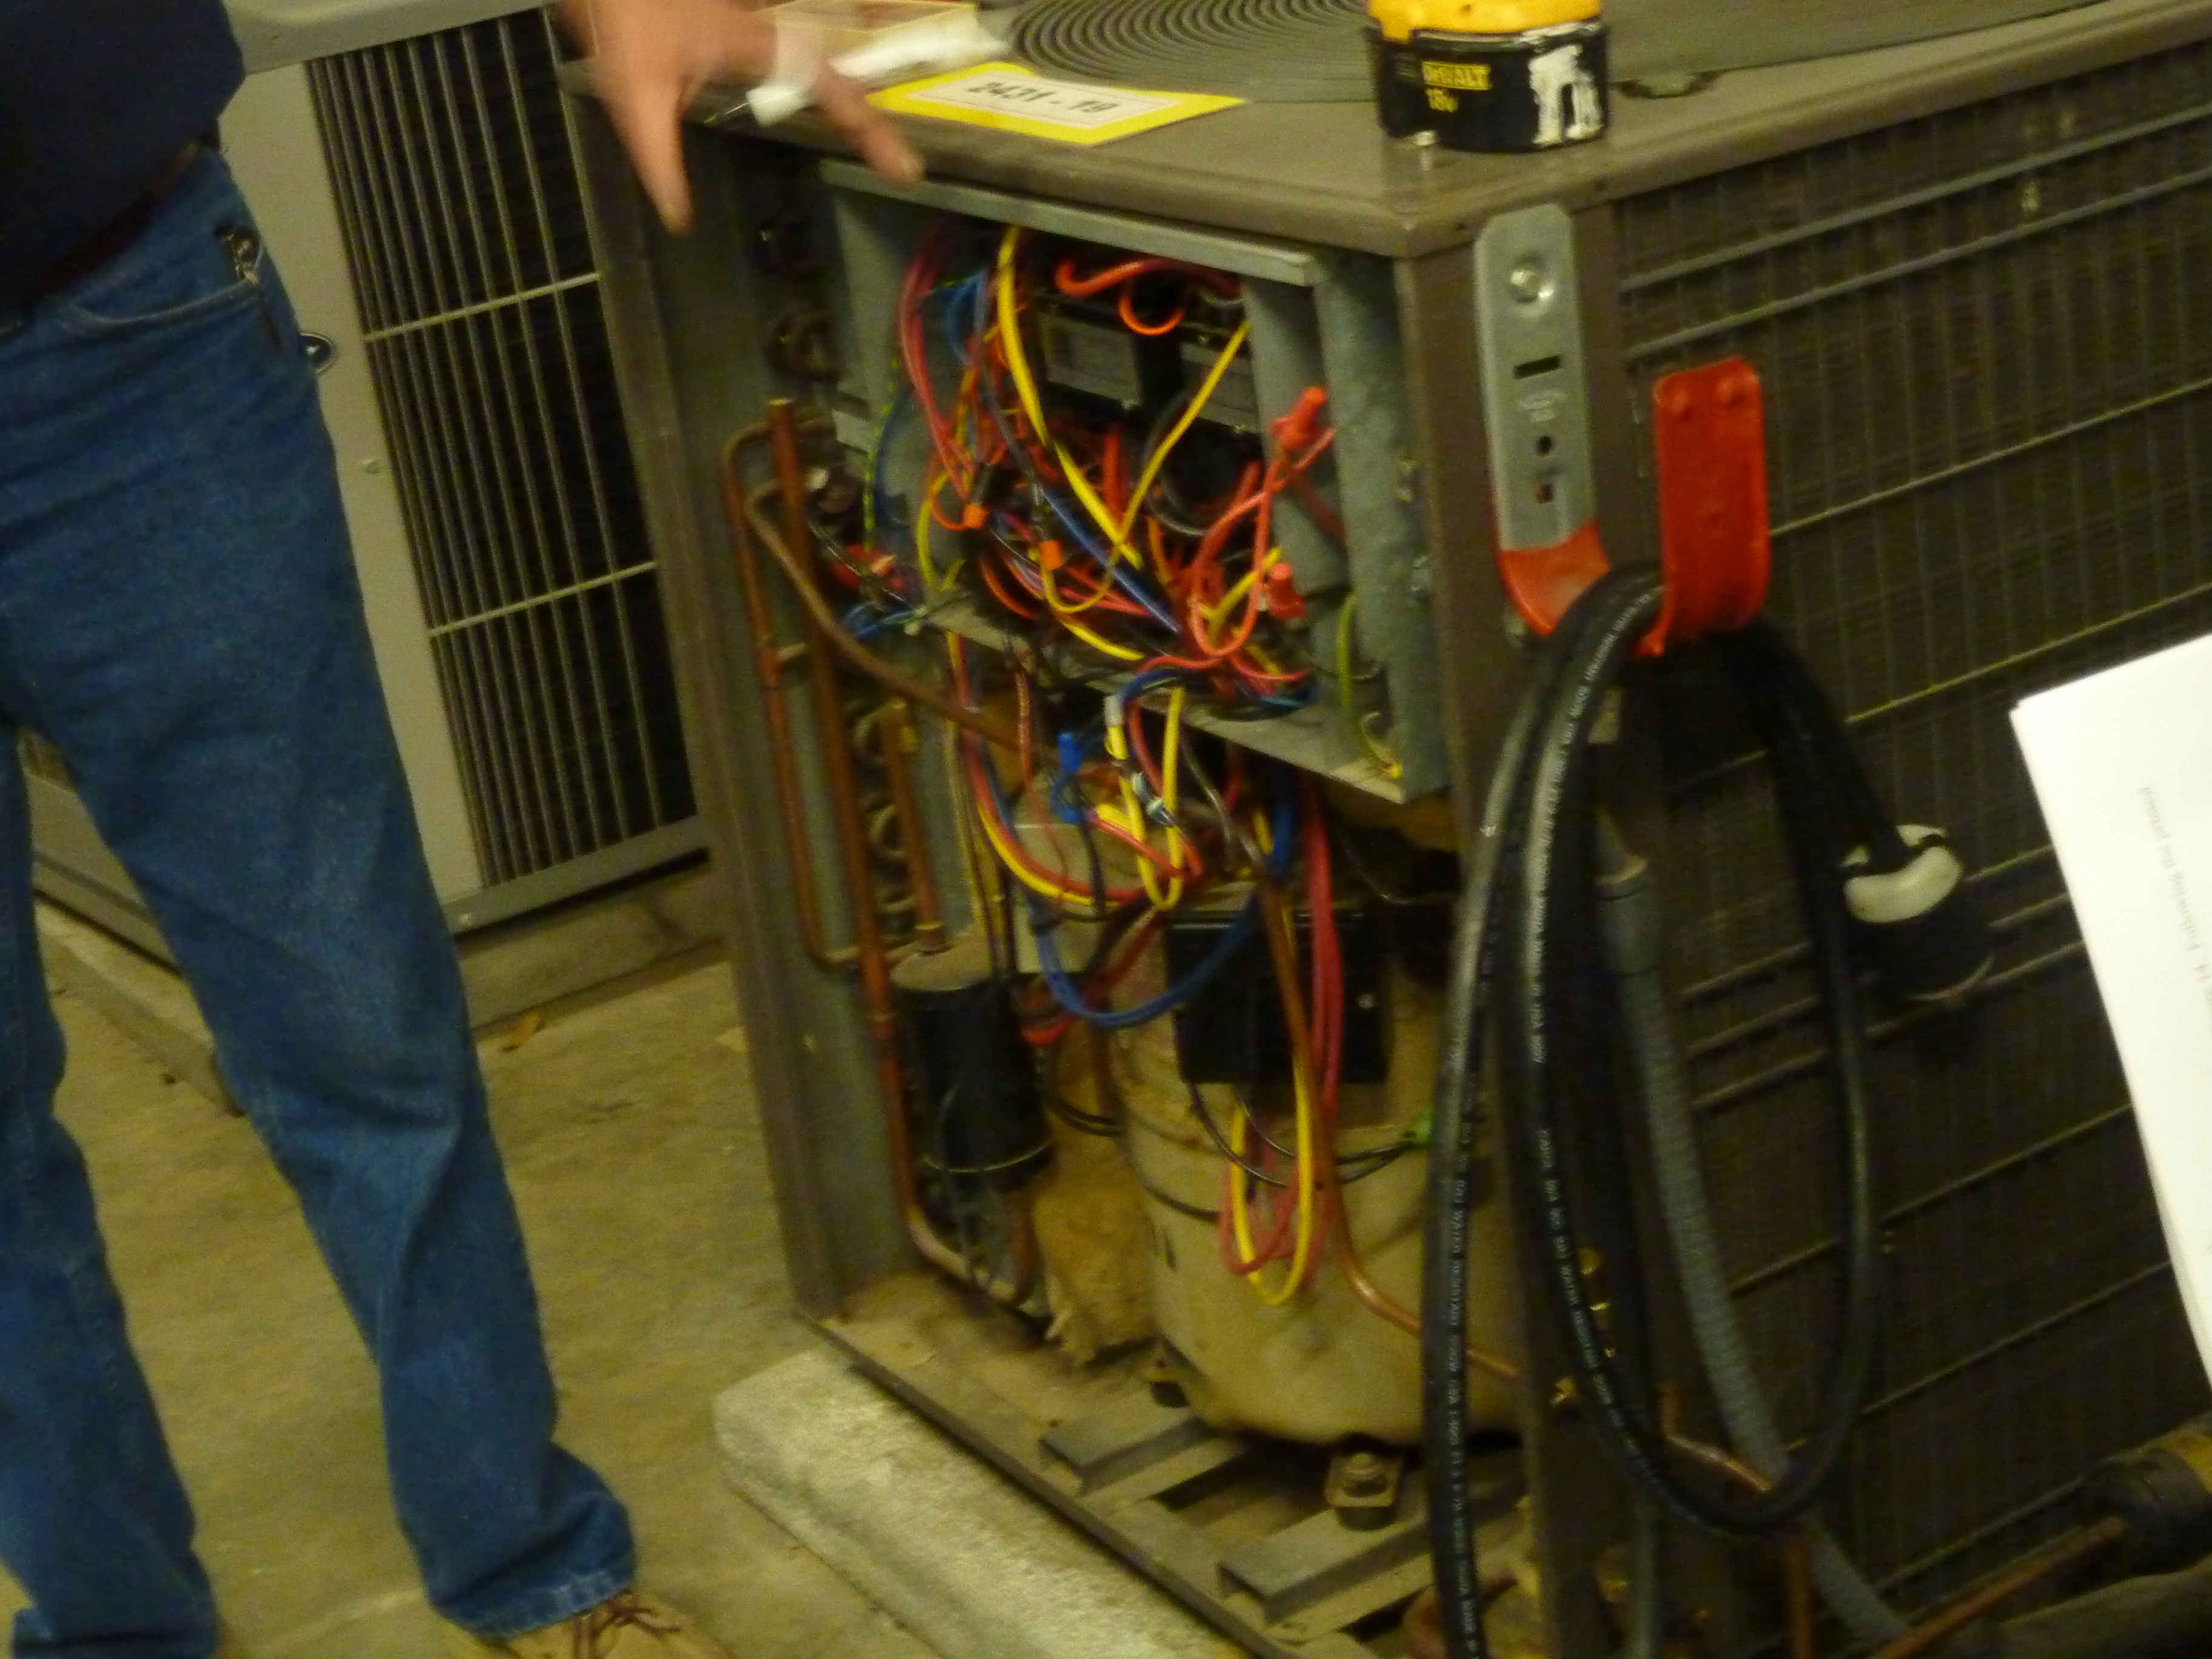 open compressor showing wiring